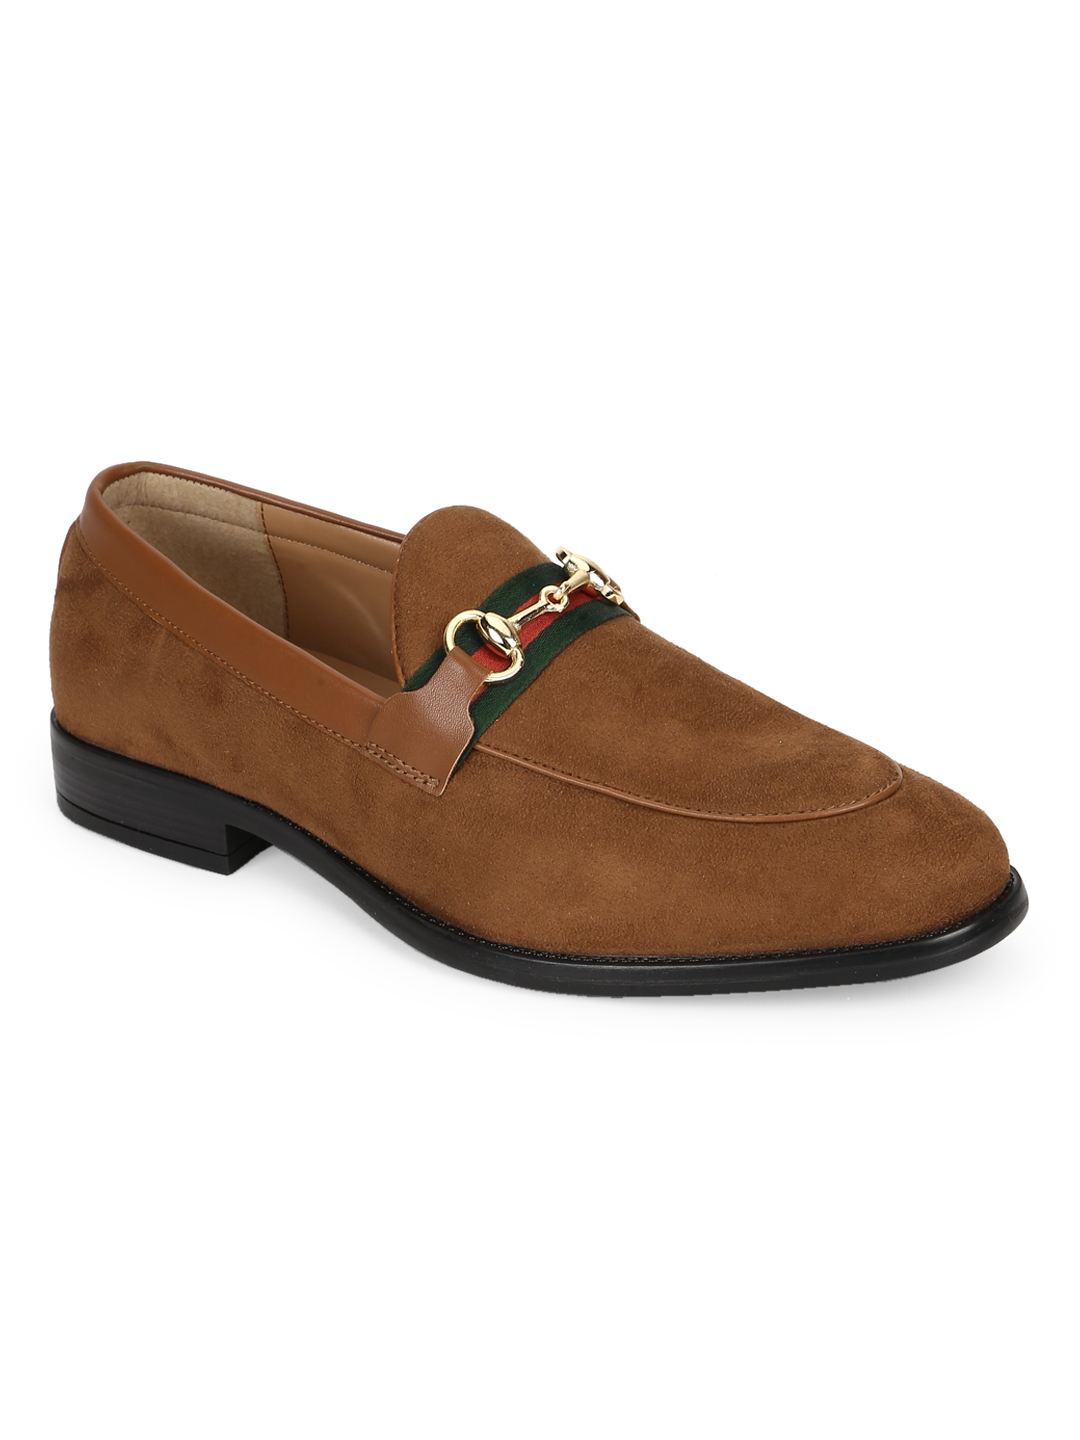 Truffle Collection | Tan Suede Men's Low Heel Chained Loafers